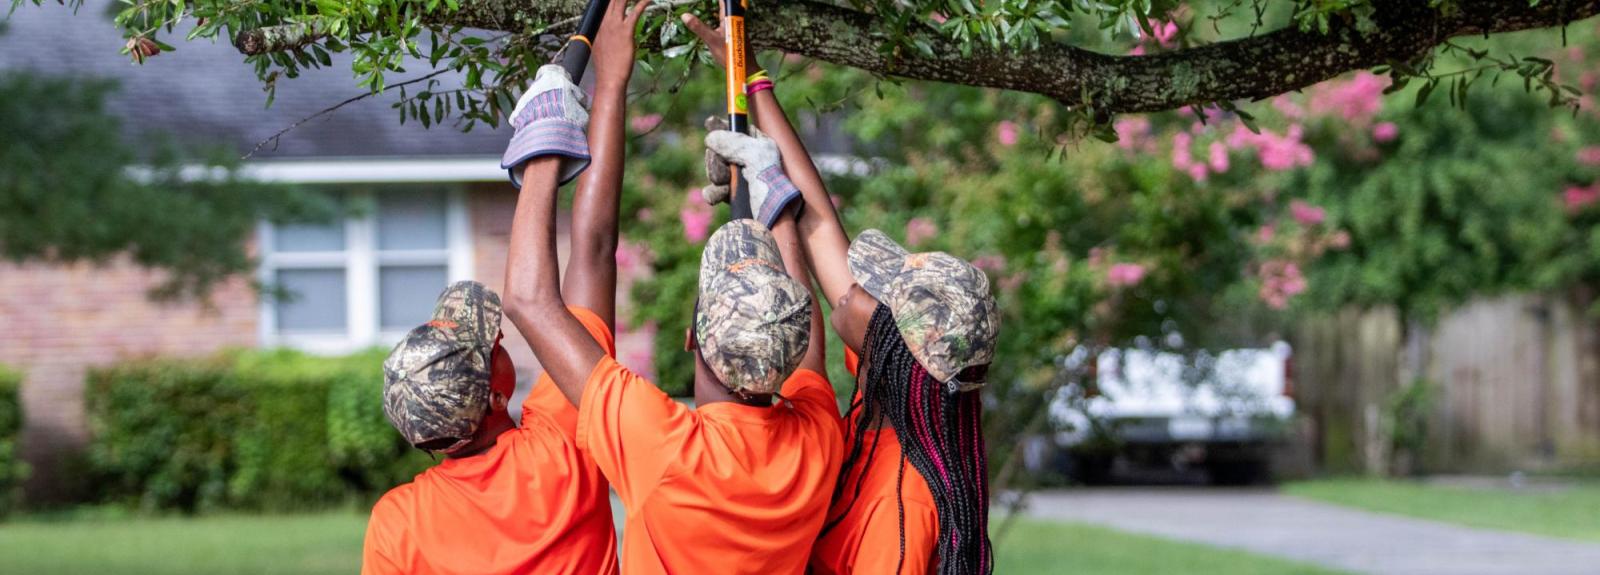 Youth trimming a tree